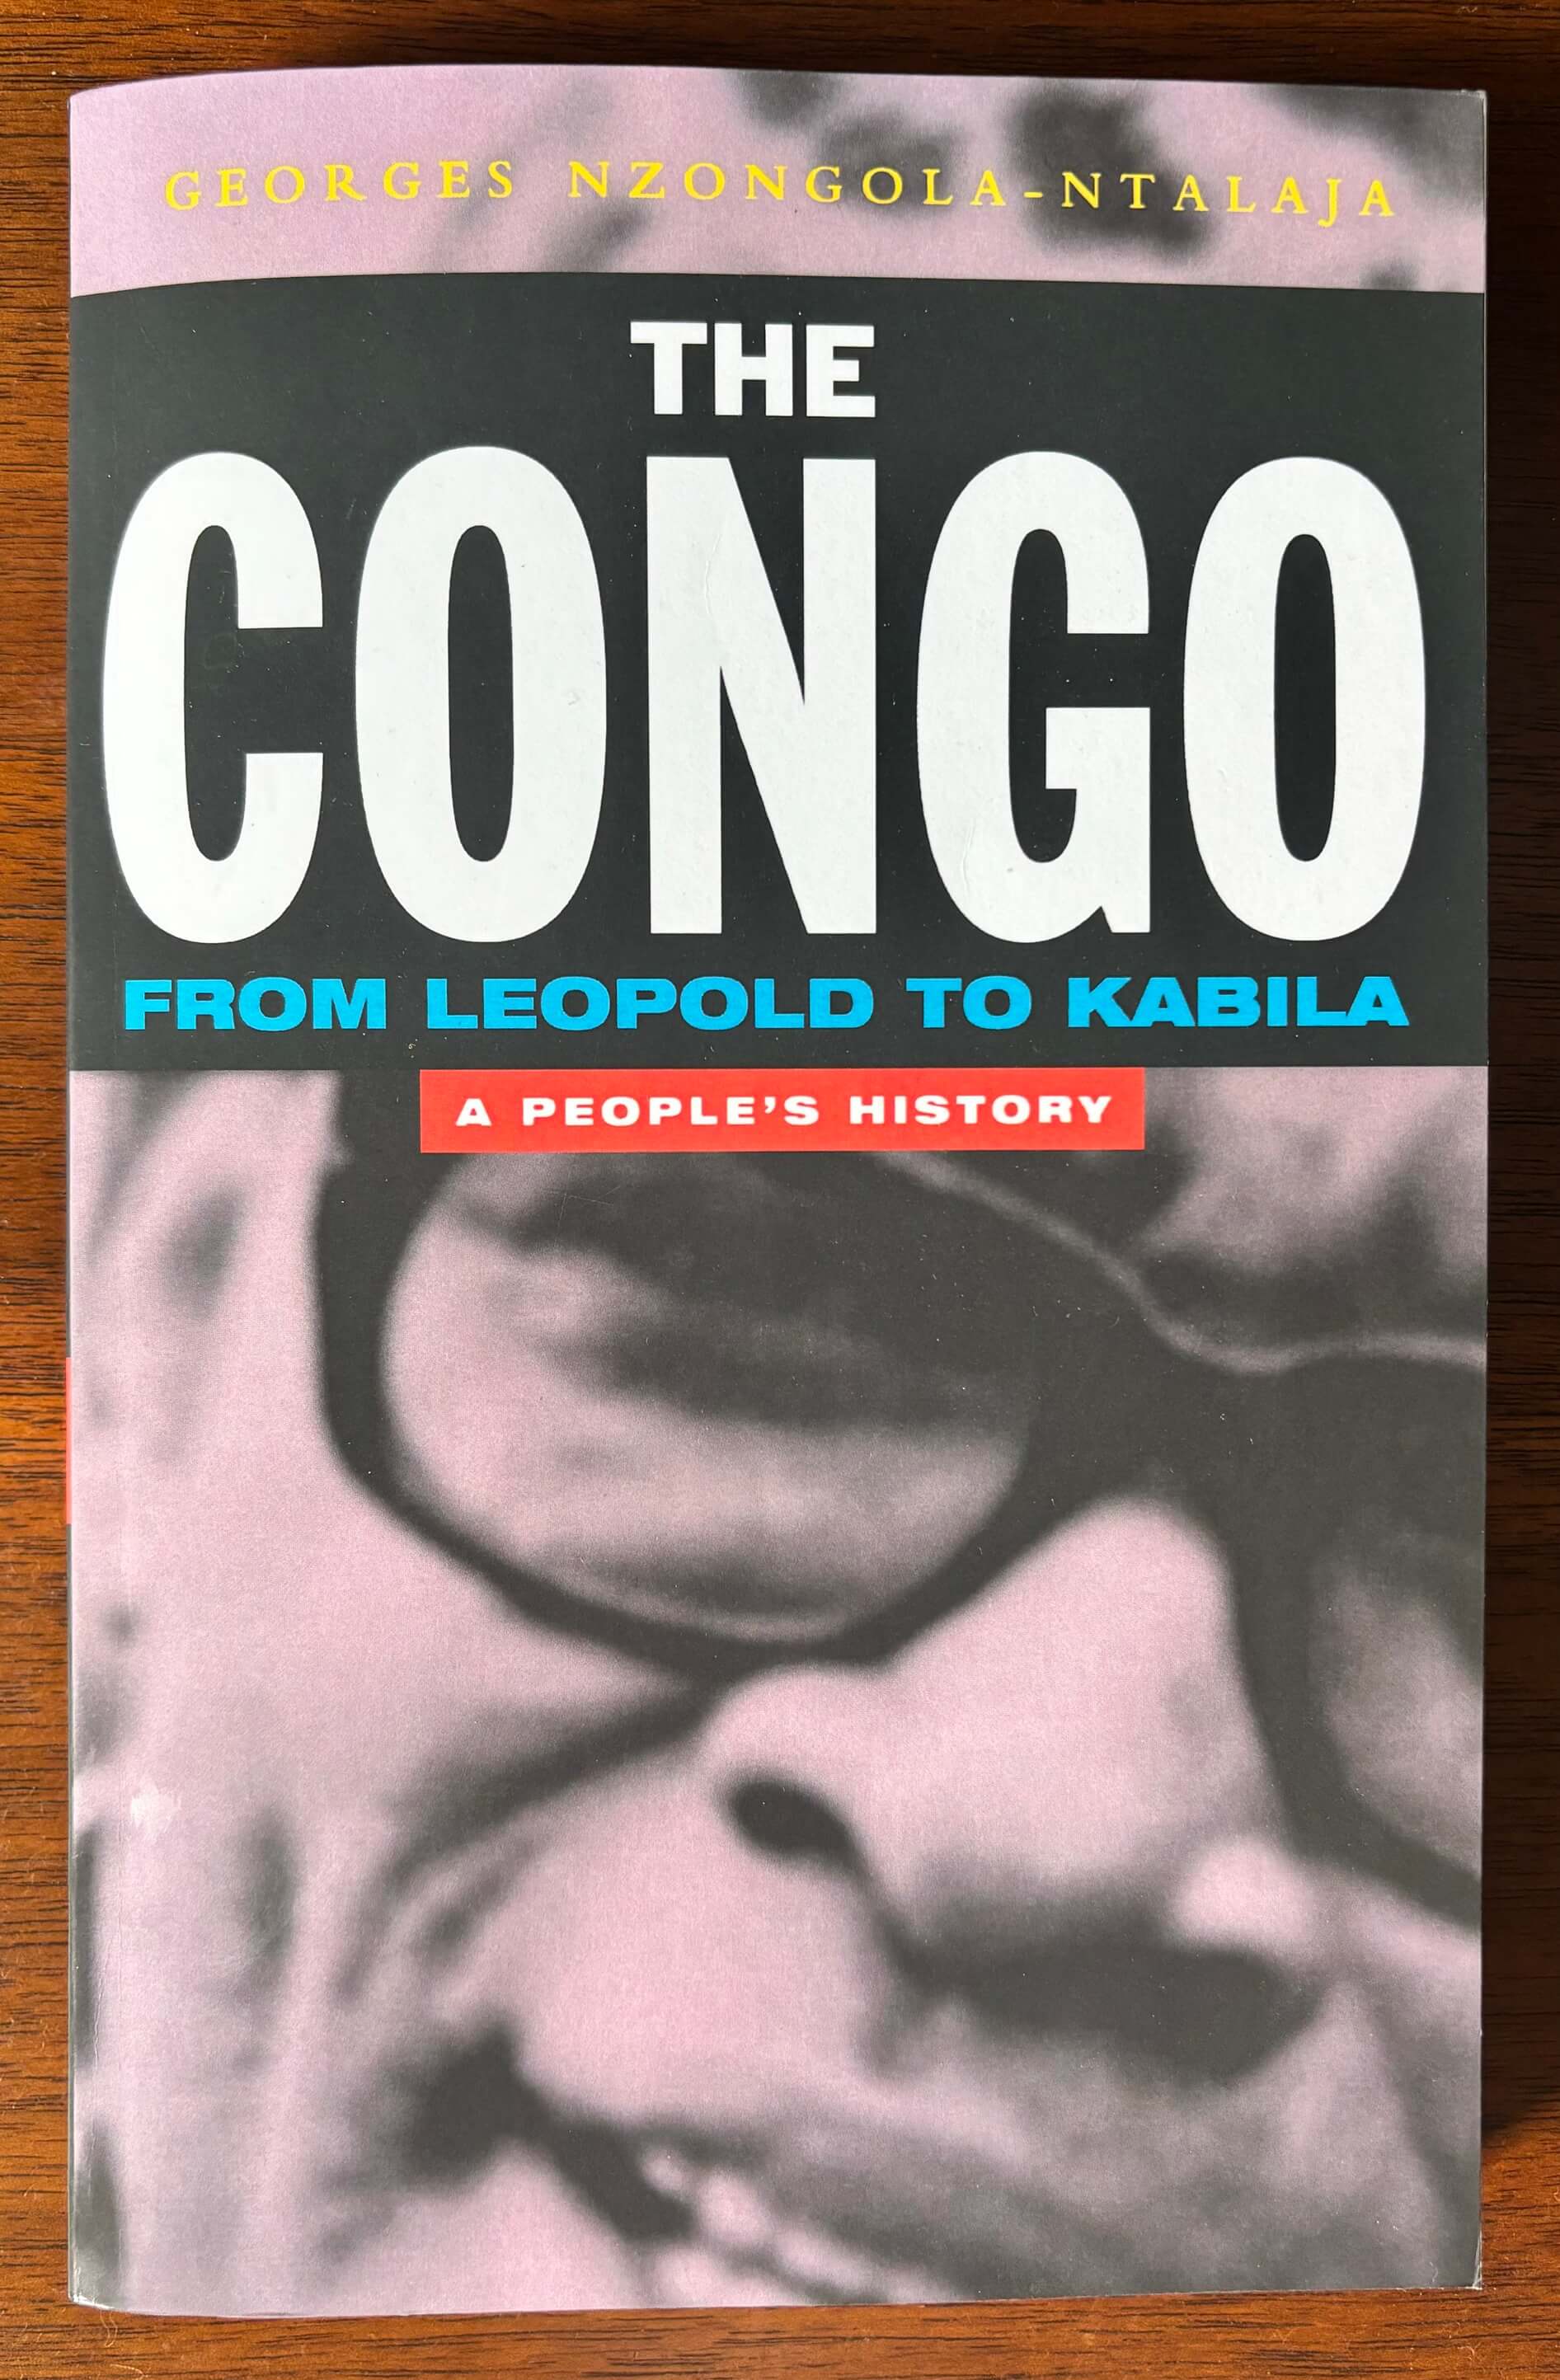 “The Congo: From Leopold to Kabila: A People’s History” by Georges Nzongola-Ntalaja